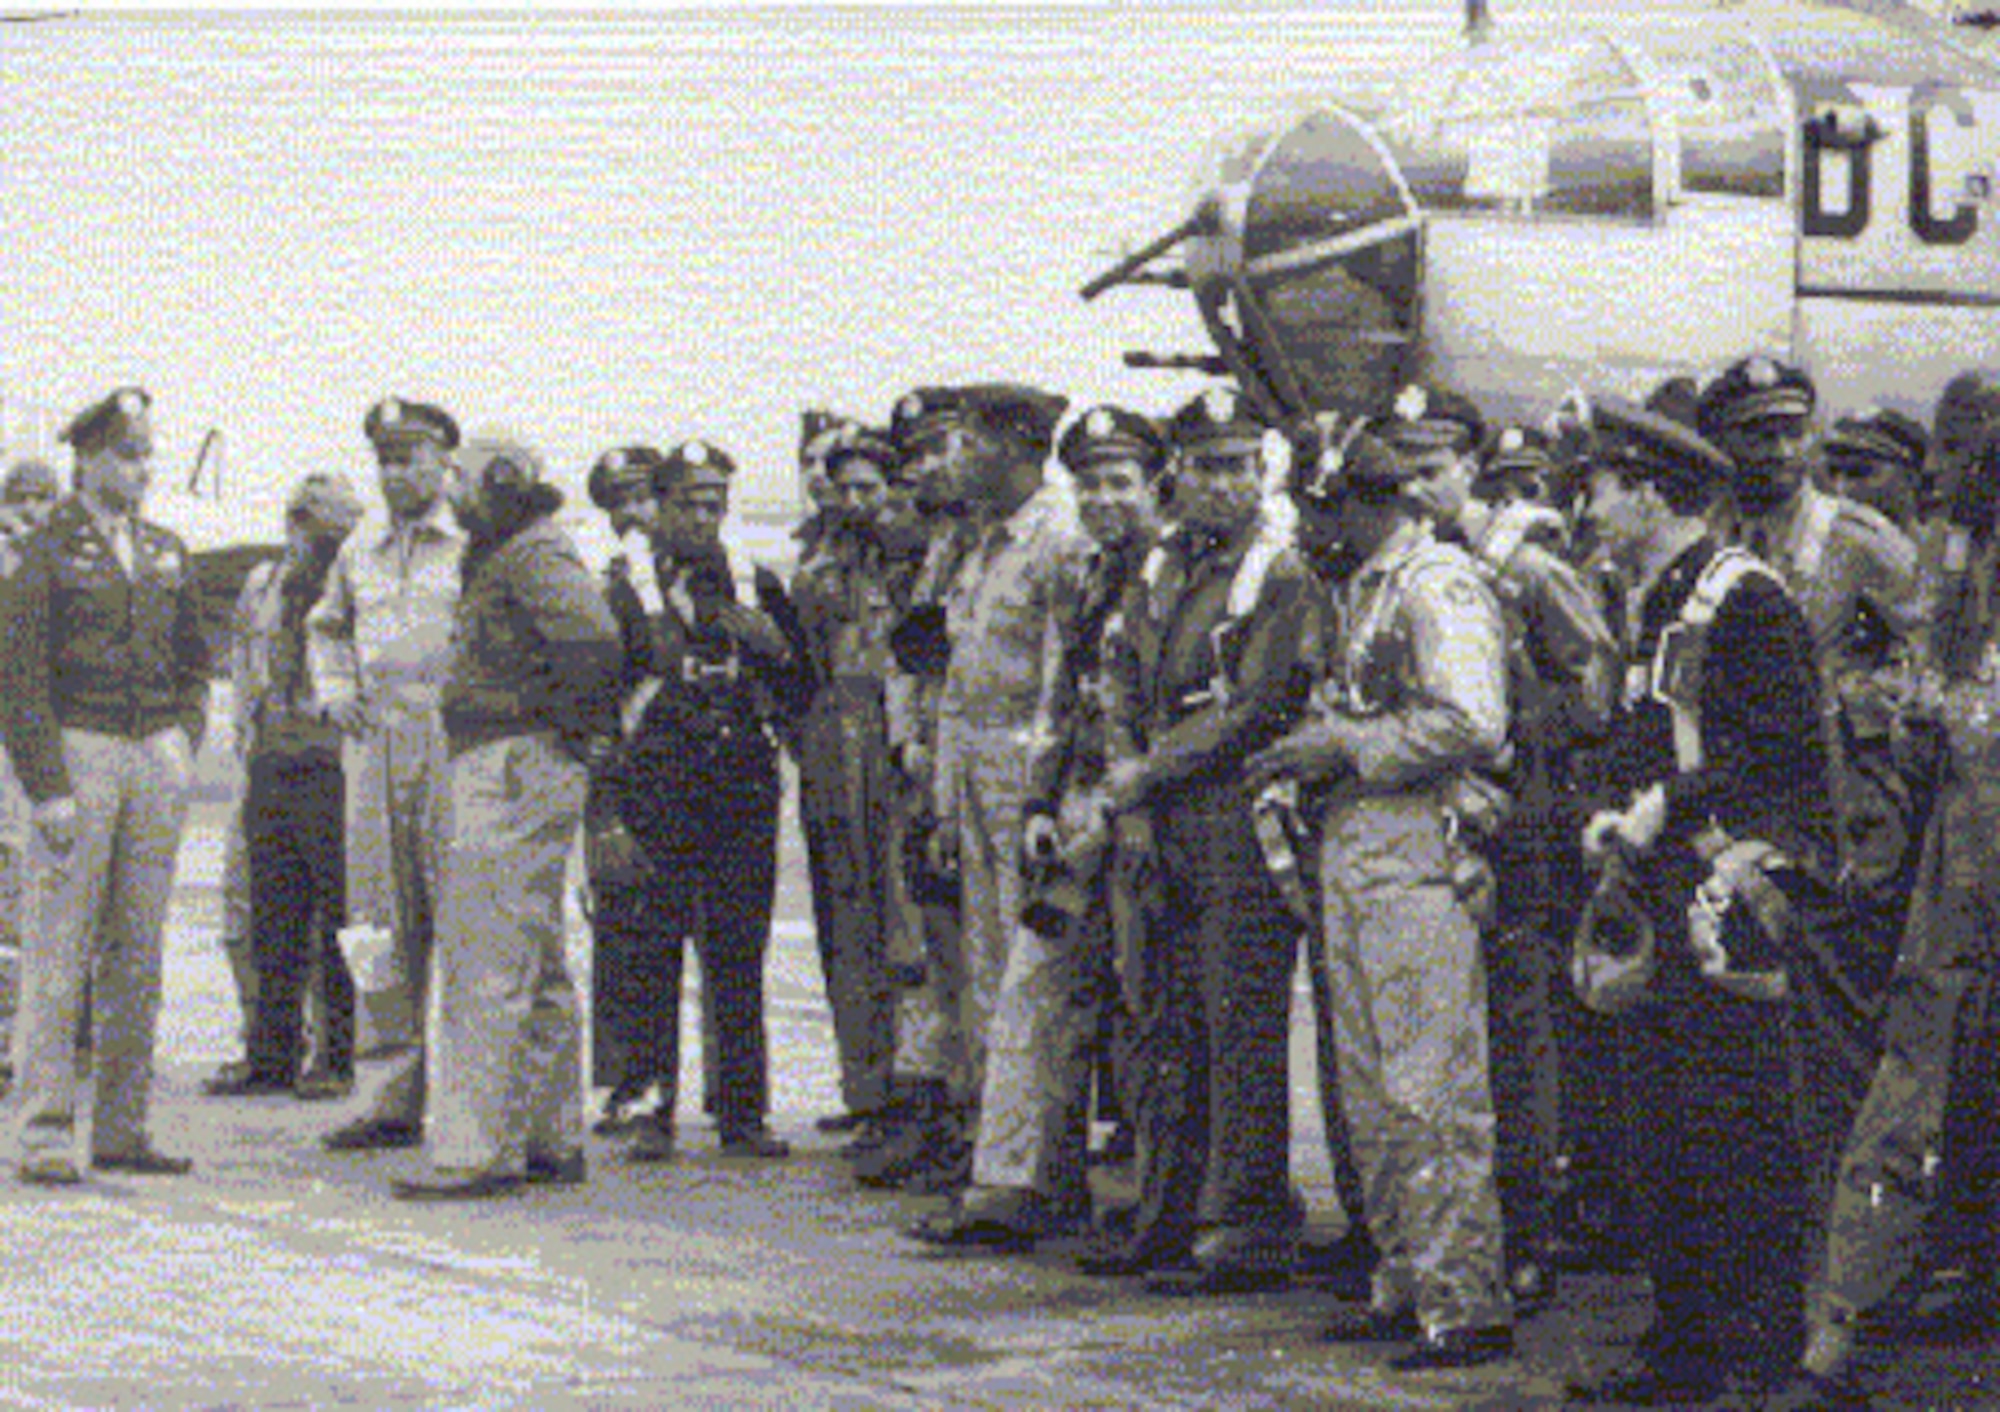 African-American pilots from the 332nd Fighter Group, the famed "Tuskegee Airmen."